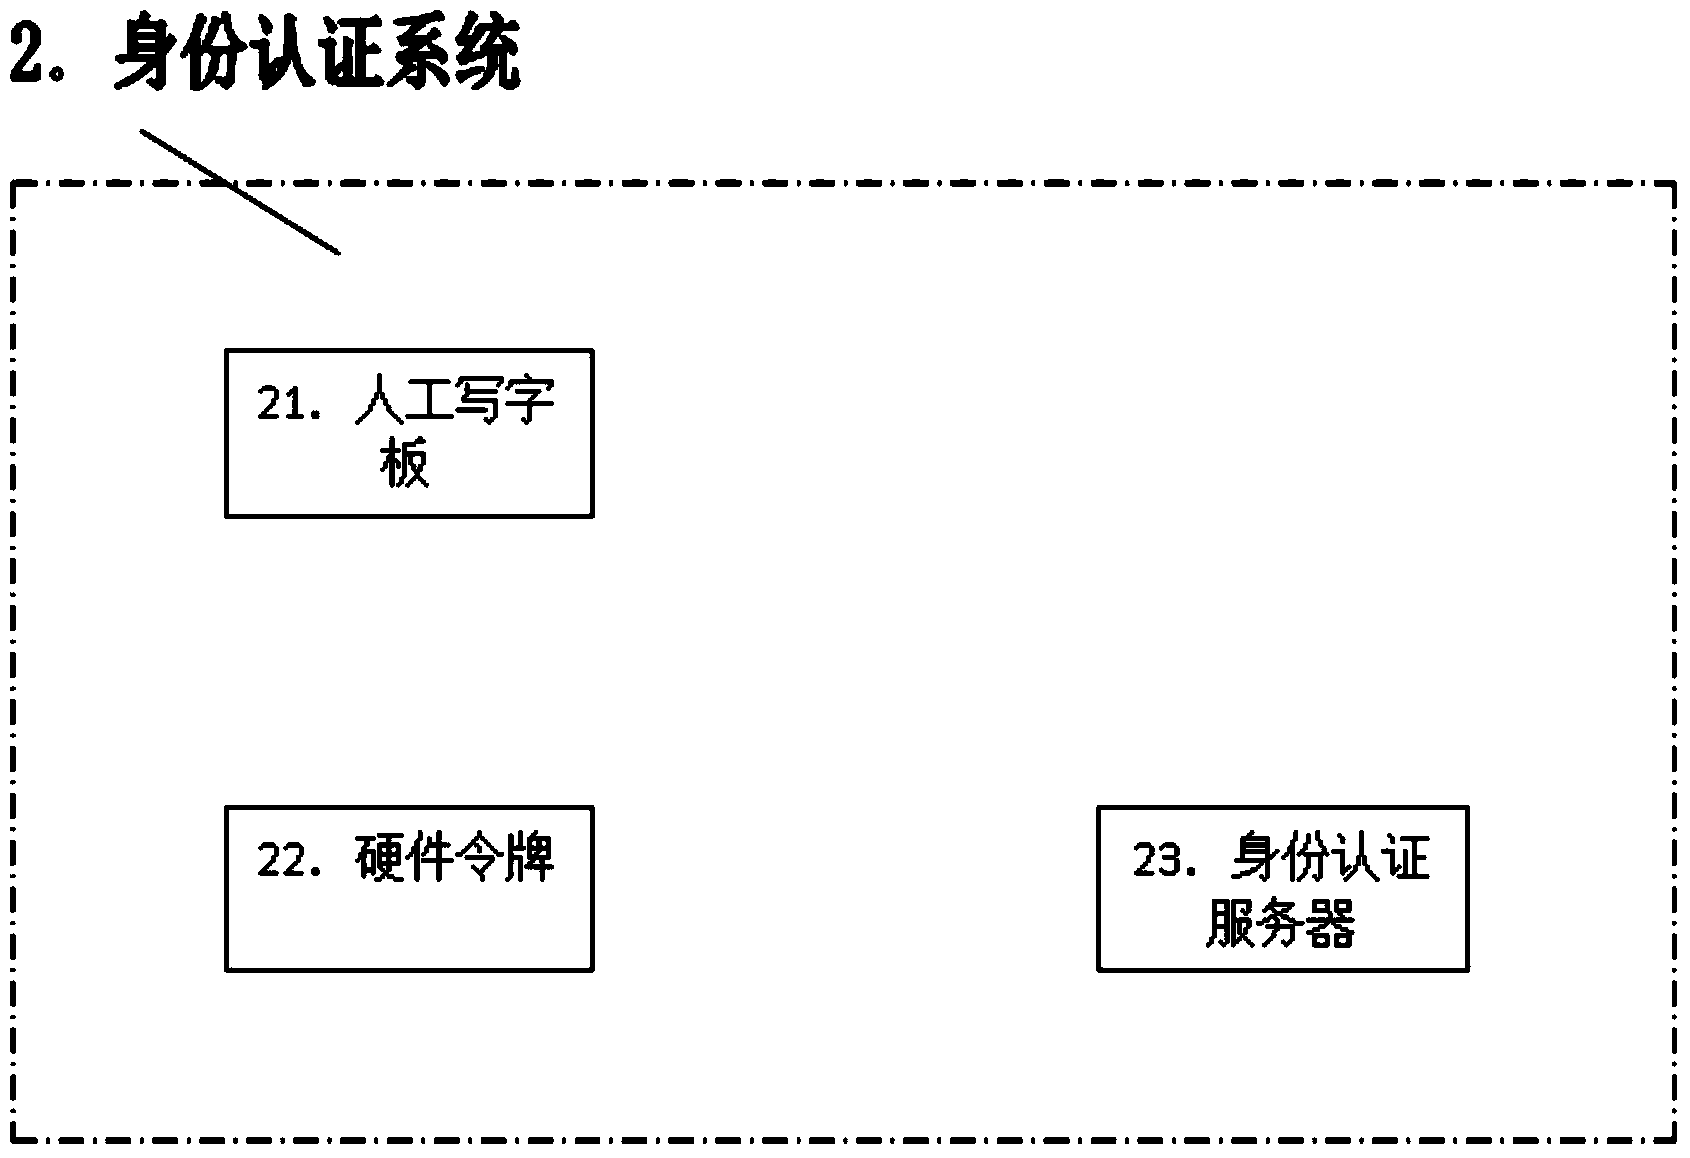 Two-factor identity authentication method based on Chinese character format information